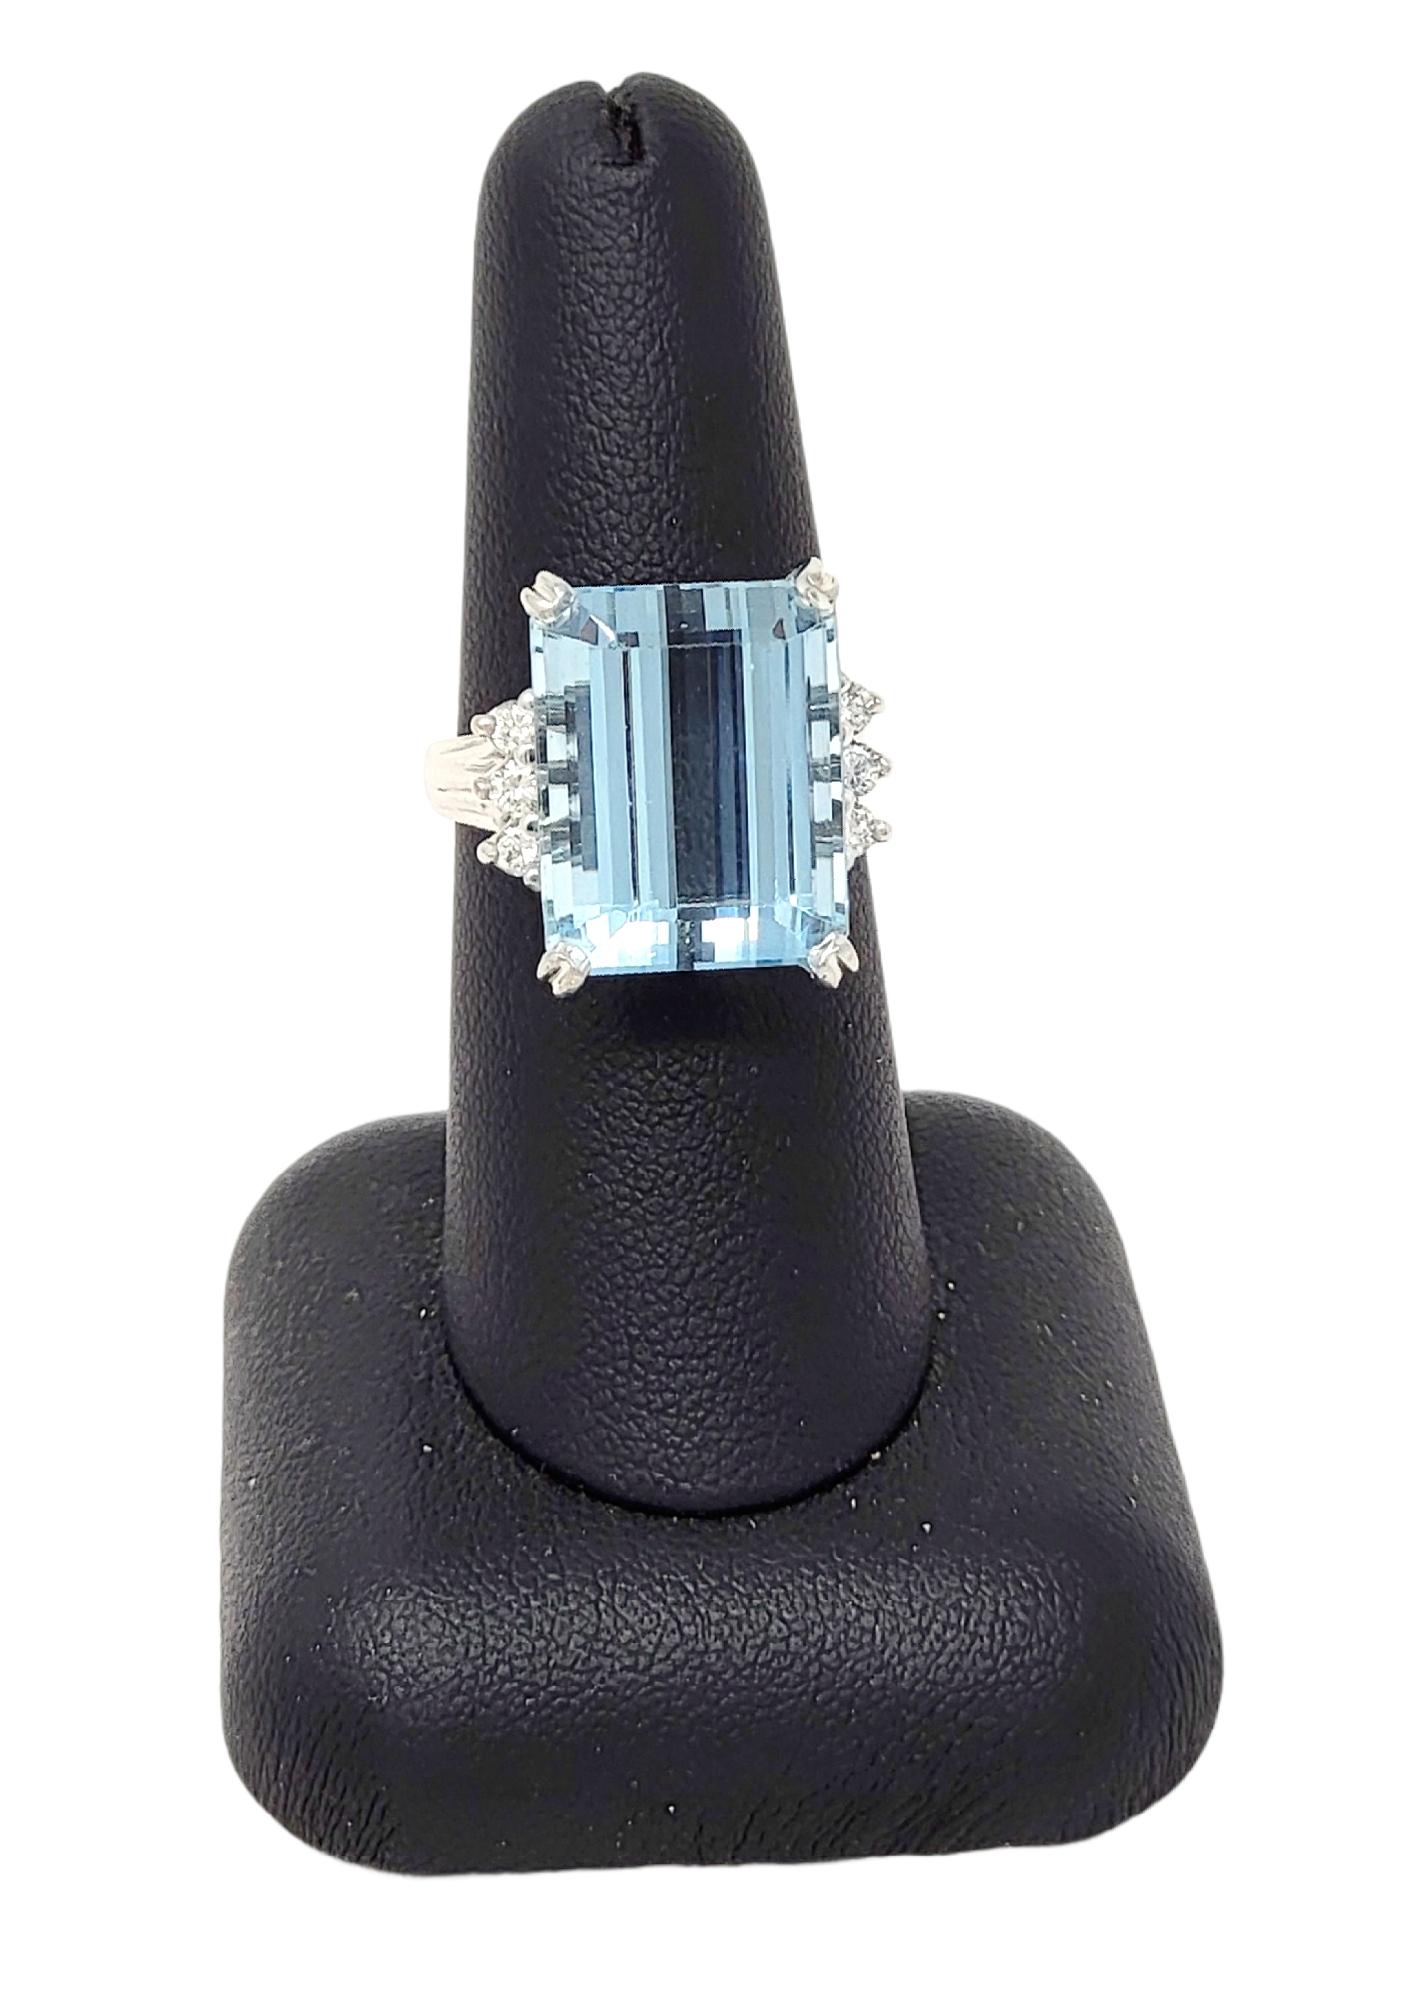 Ring size: 7.25

Breathtaking aquamarine and diamond cocktail ring. This eye-catching piece makes a bold statement with both its impressive size and exquisite color. The incredible 14.53 carat emerald cut aquamarine stone is 4 prong set in 18 karat